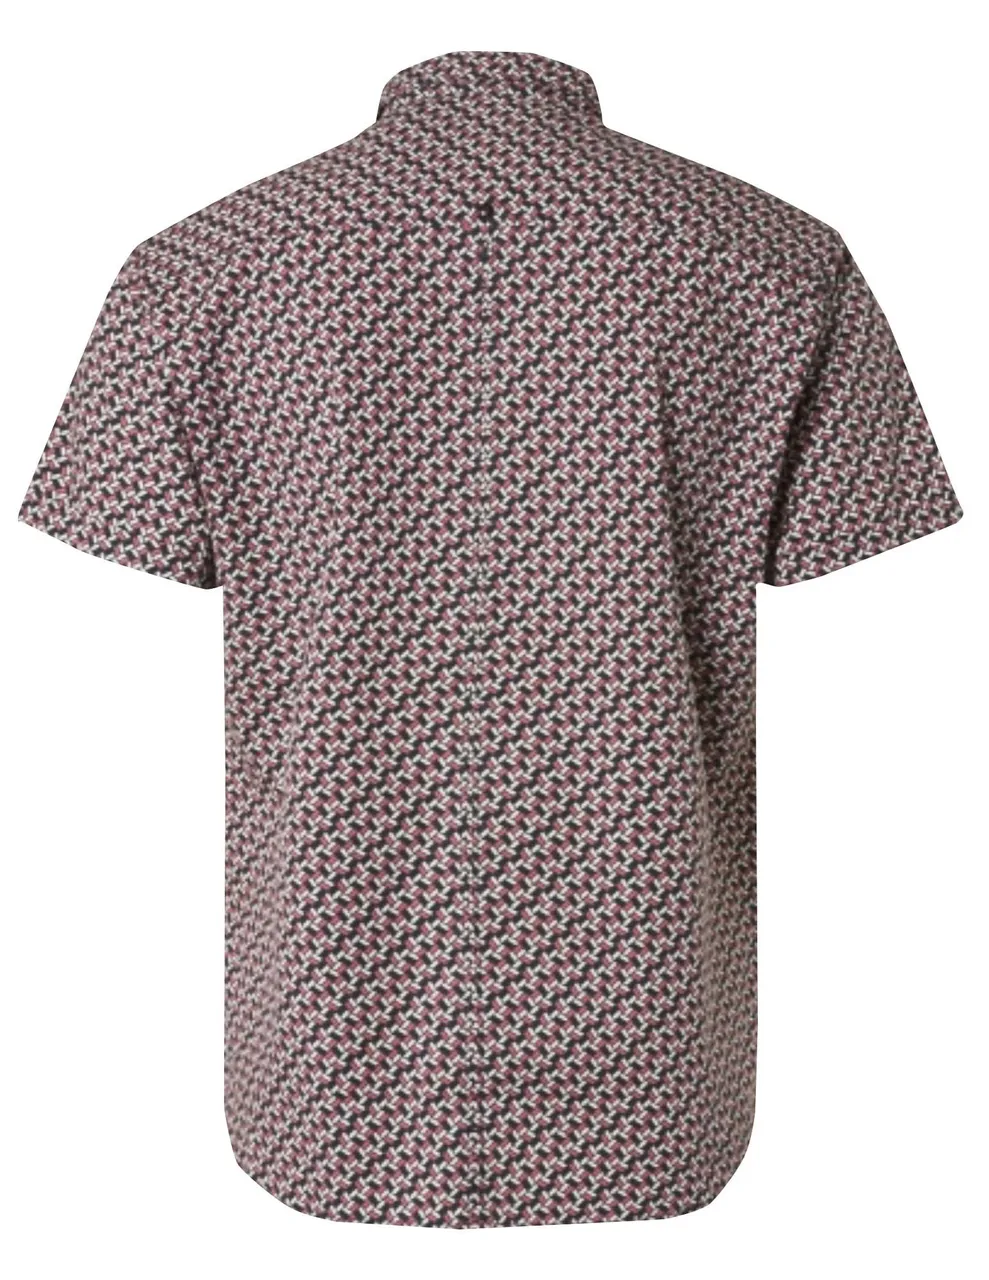 No Excess Shirt short sleeve allover printed stretch